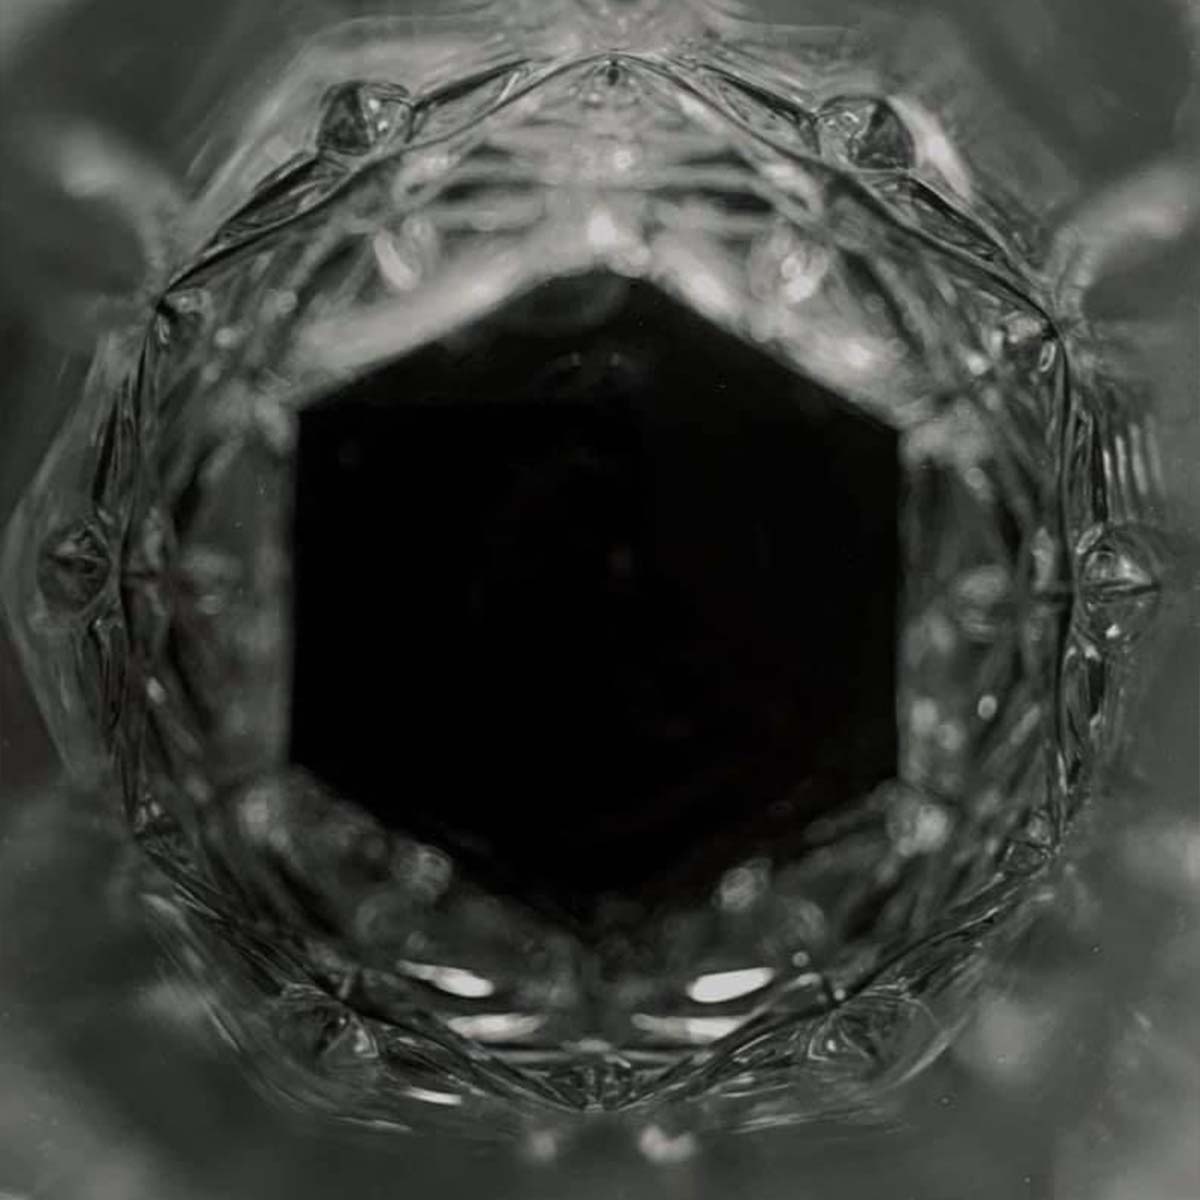 image of the inside of a glass